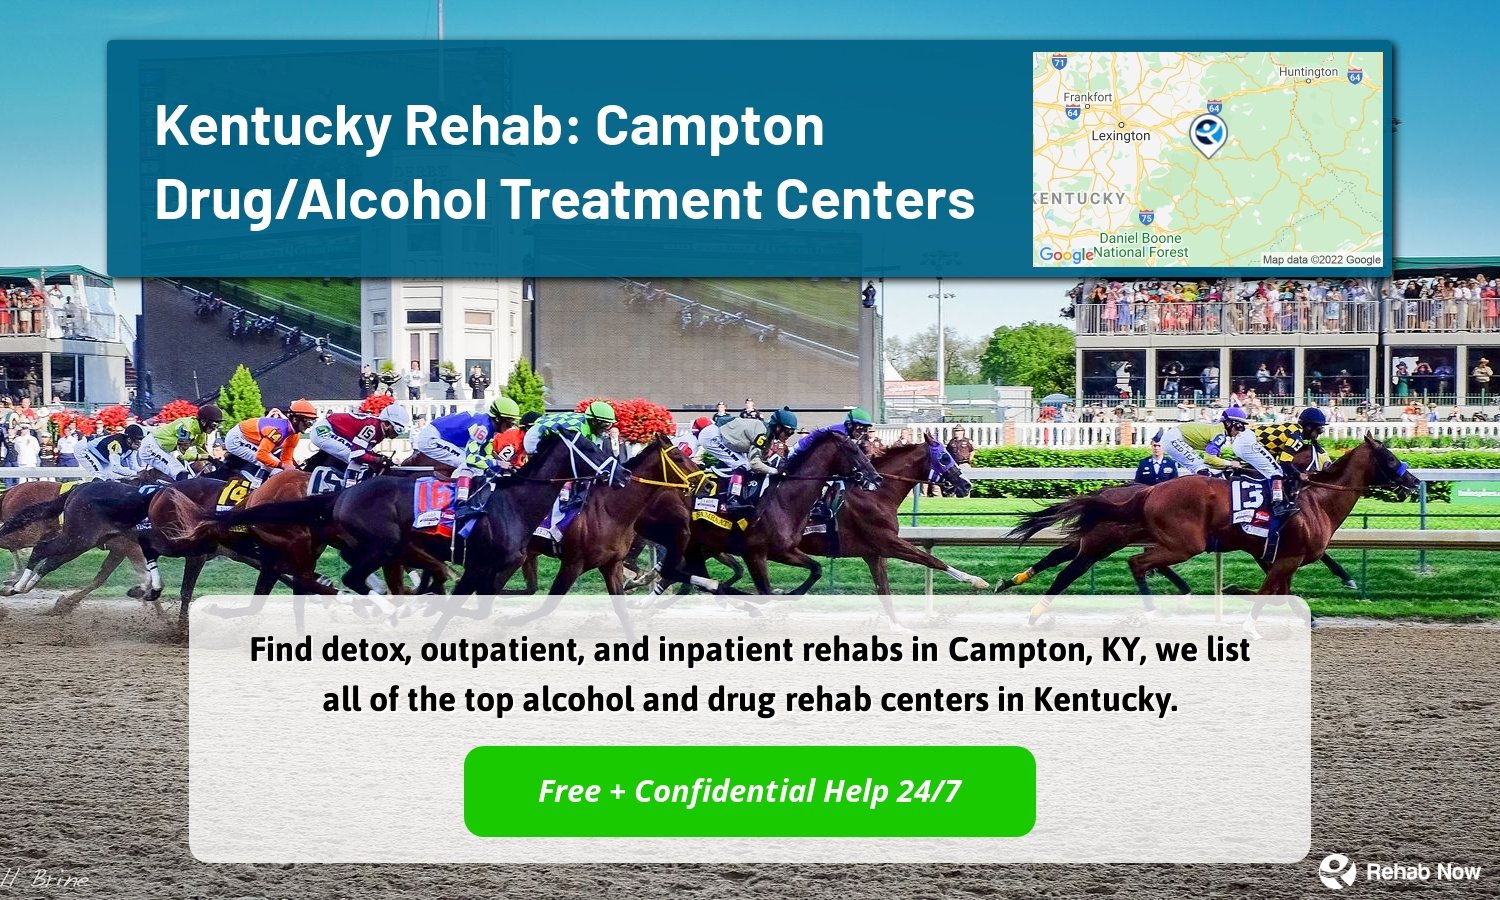 Find detox, outpatient, and inpatient rehabs in Campton, KY, we list all of the top alcohol and drug rehab centers in Kentucky.